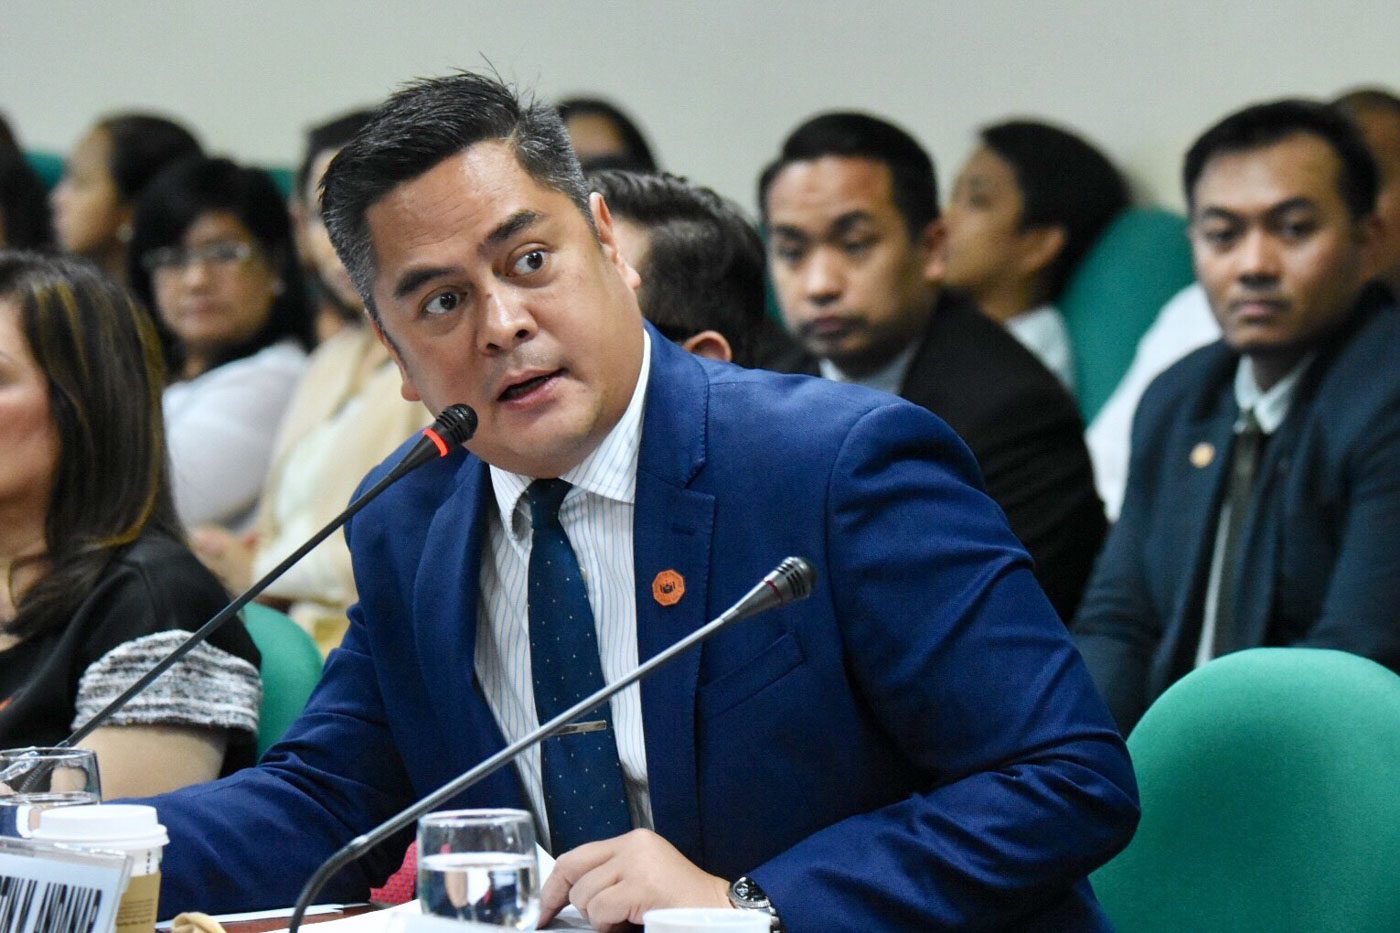 PCOO limits cross-posting content on its social media platforms